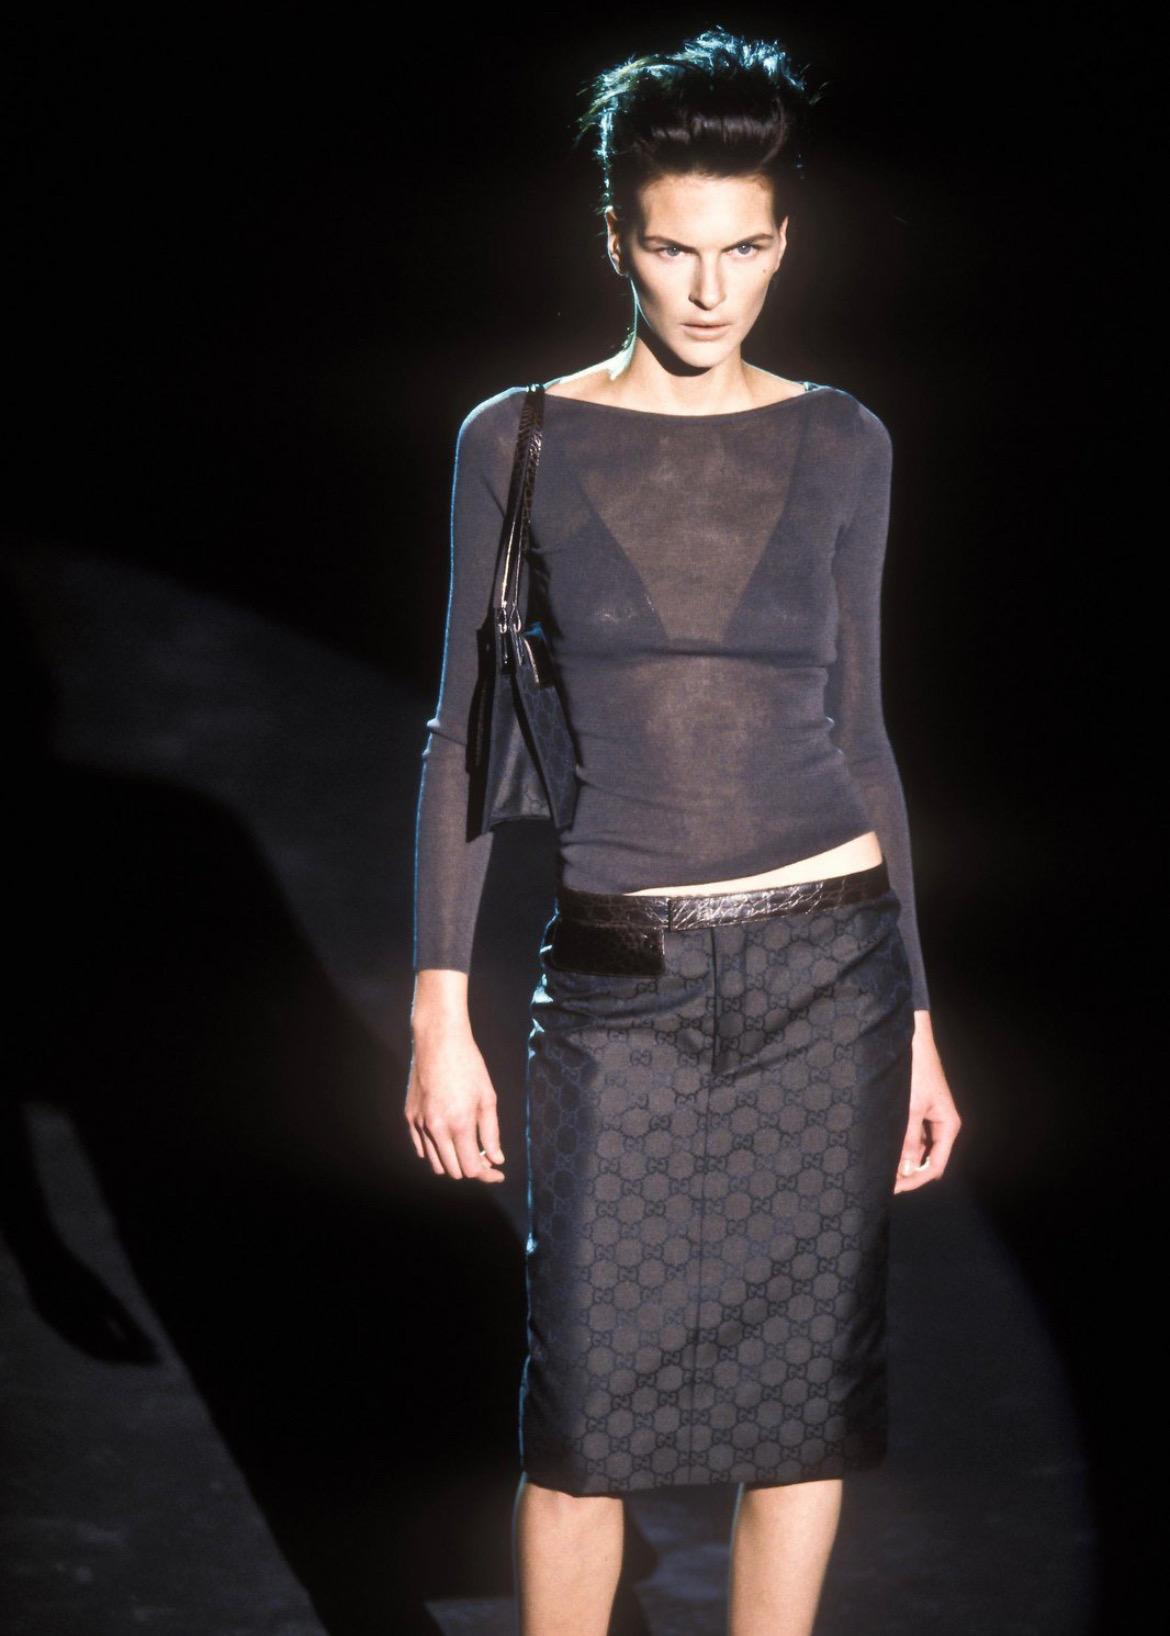 Presenting a fabulous black Gucci ‘GG’ monogram skirt, designed by Tom Ford. From the Spring/Summer 1998 collection, a crocodile accented version of this skirt debuted on the season’s runway. A must-have for any Gucci girl, this pencil skirt is